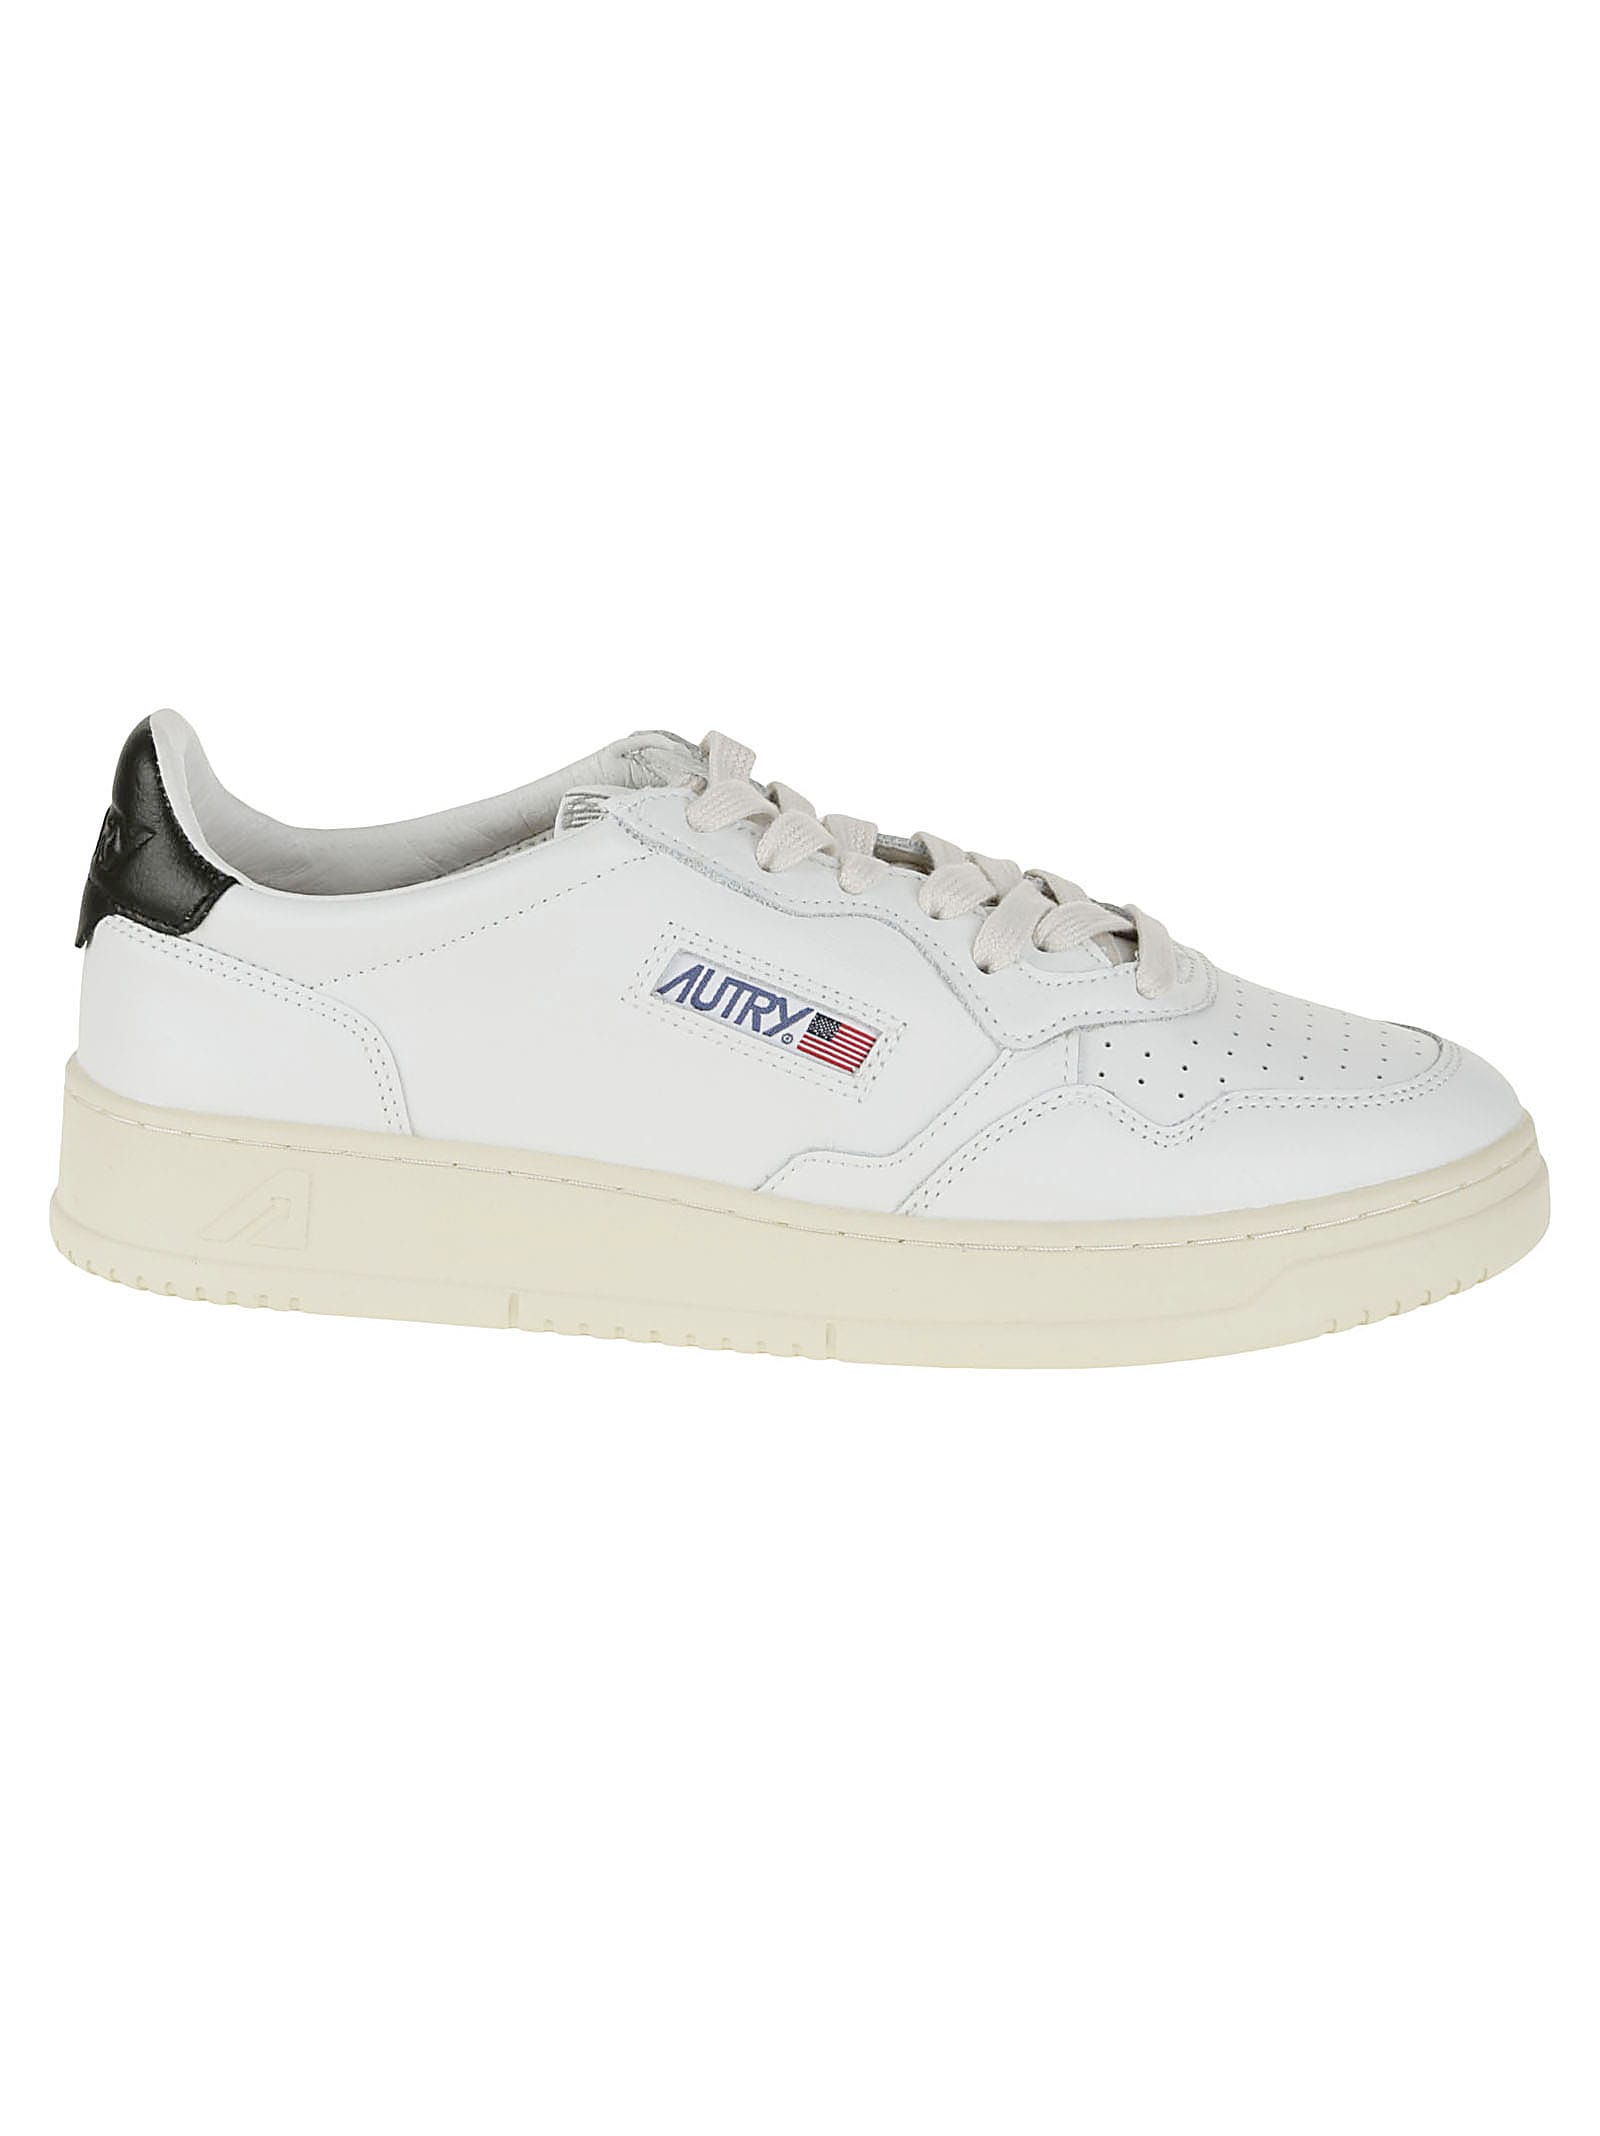 Autry Logo Patched Low Sneakers